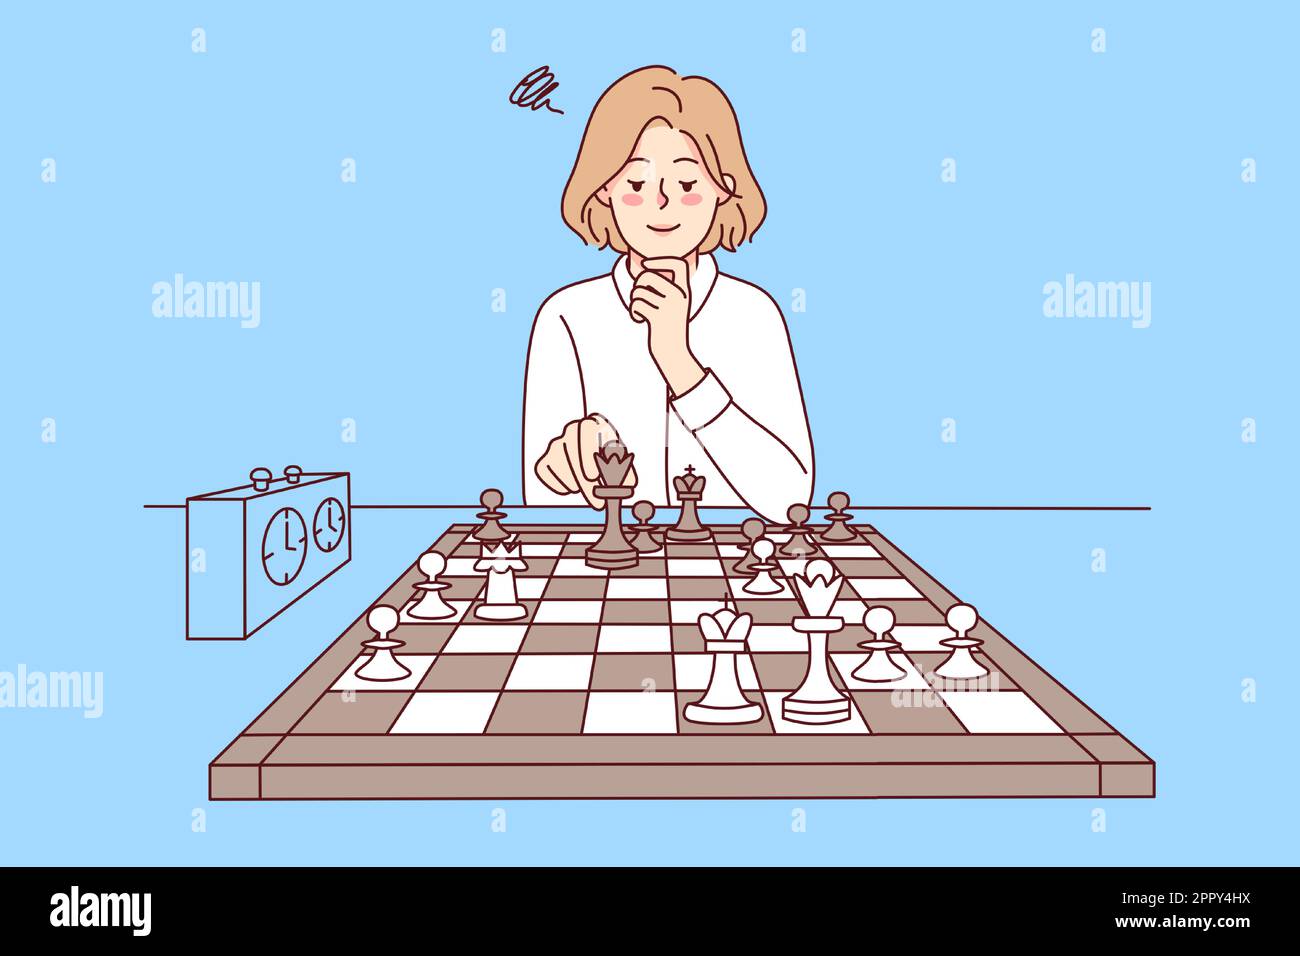 Clever girl playing chess Stock Vector